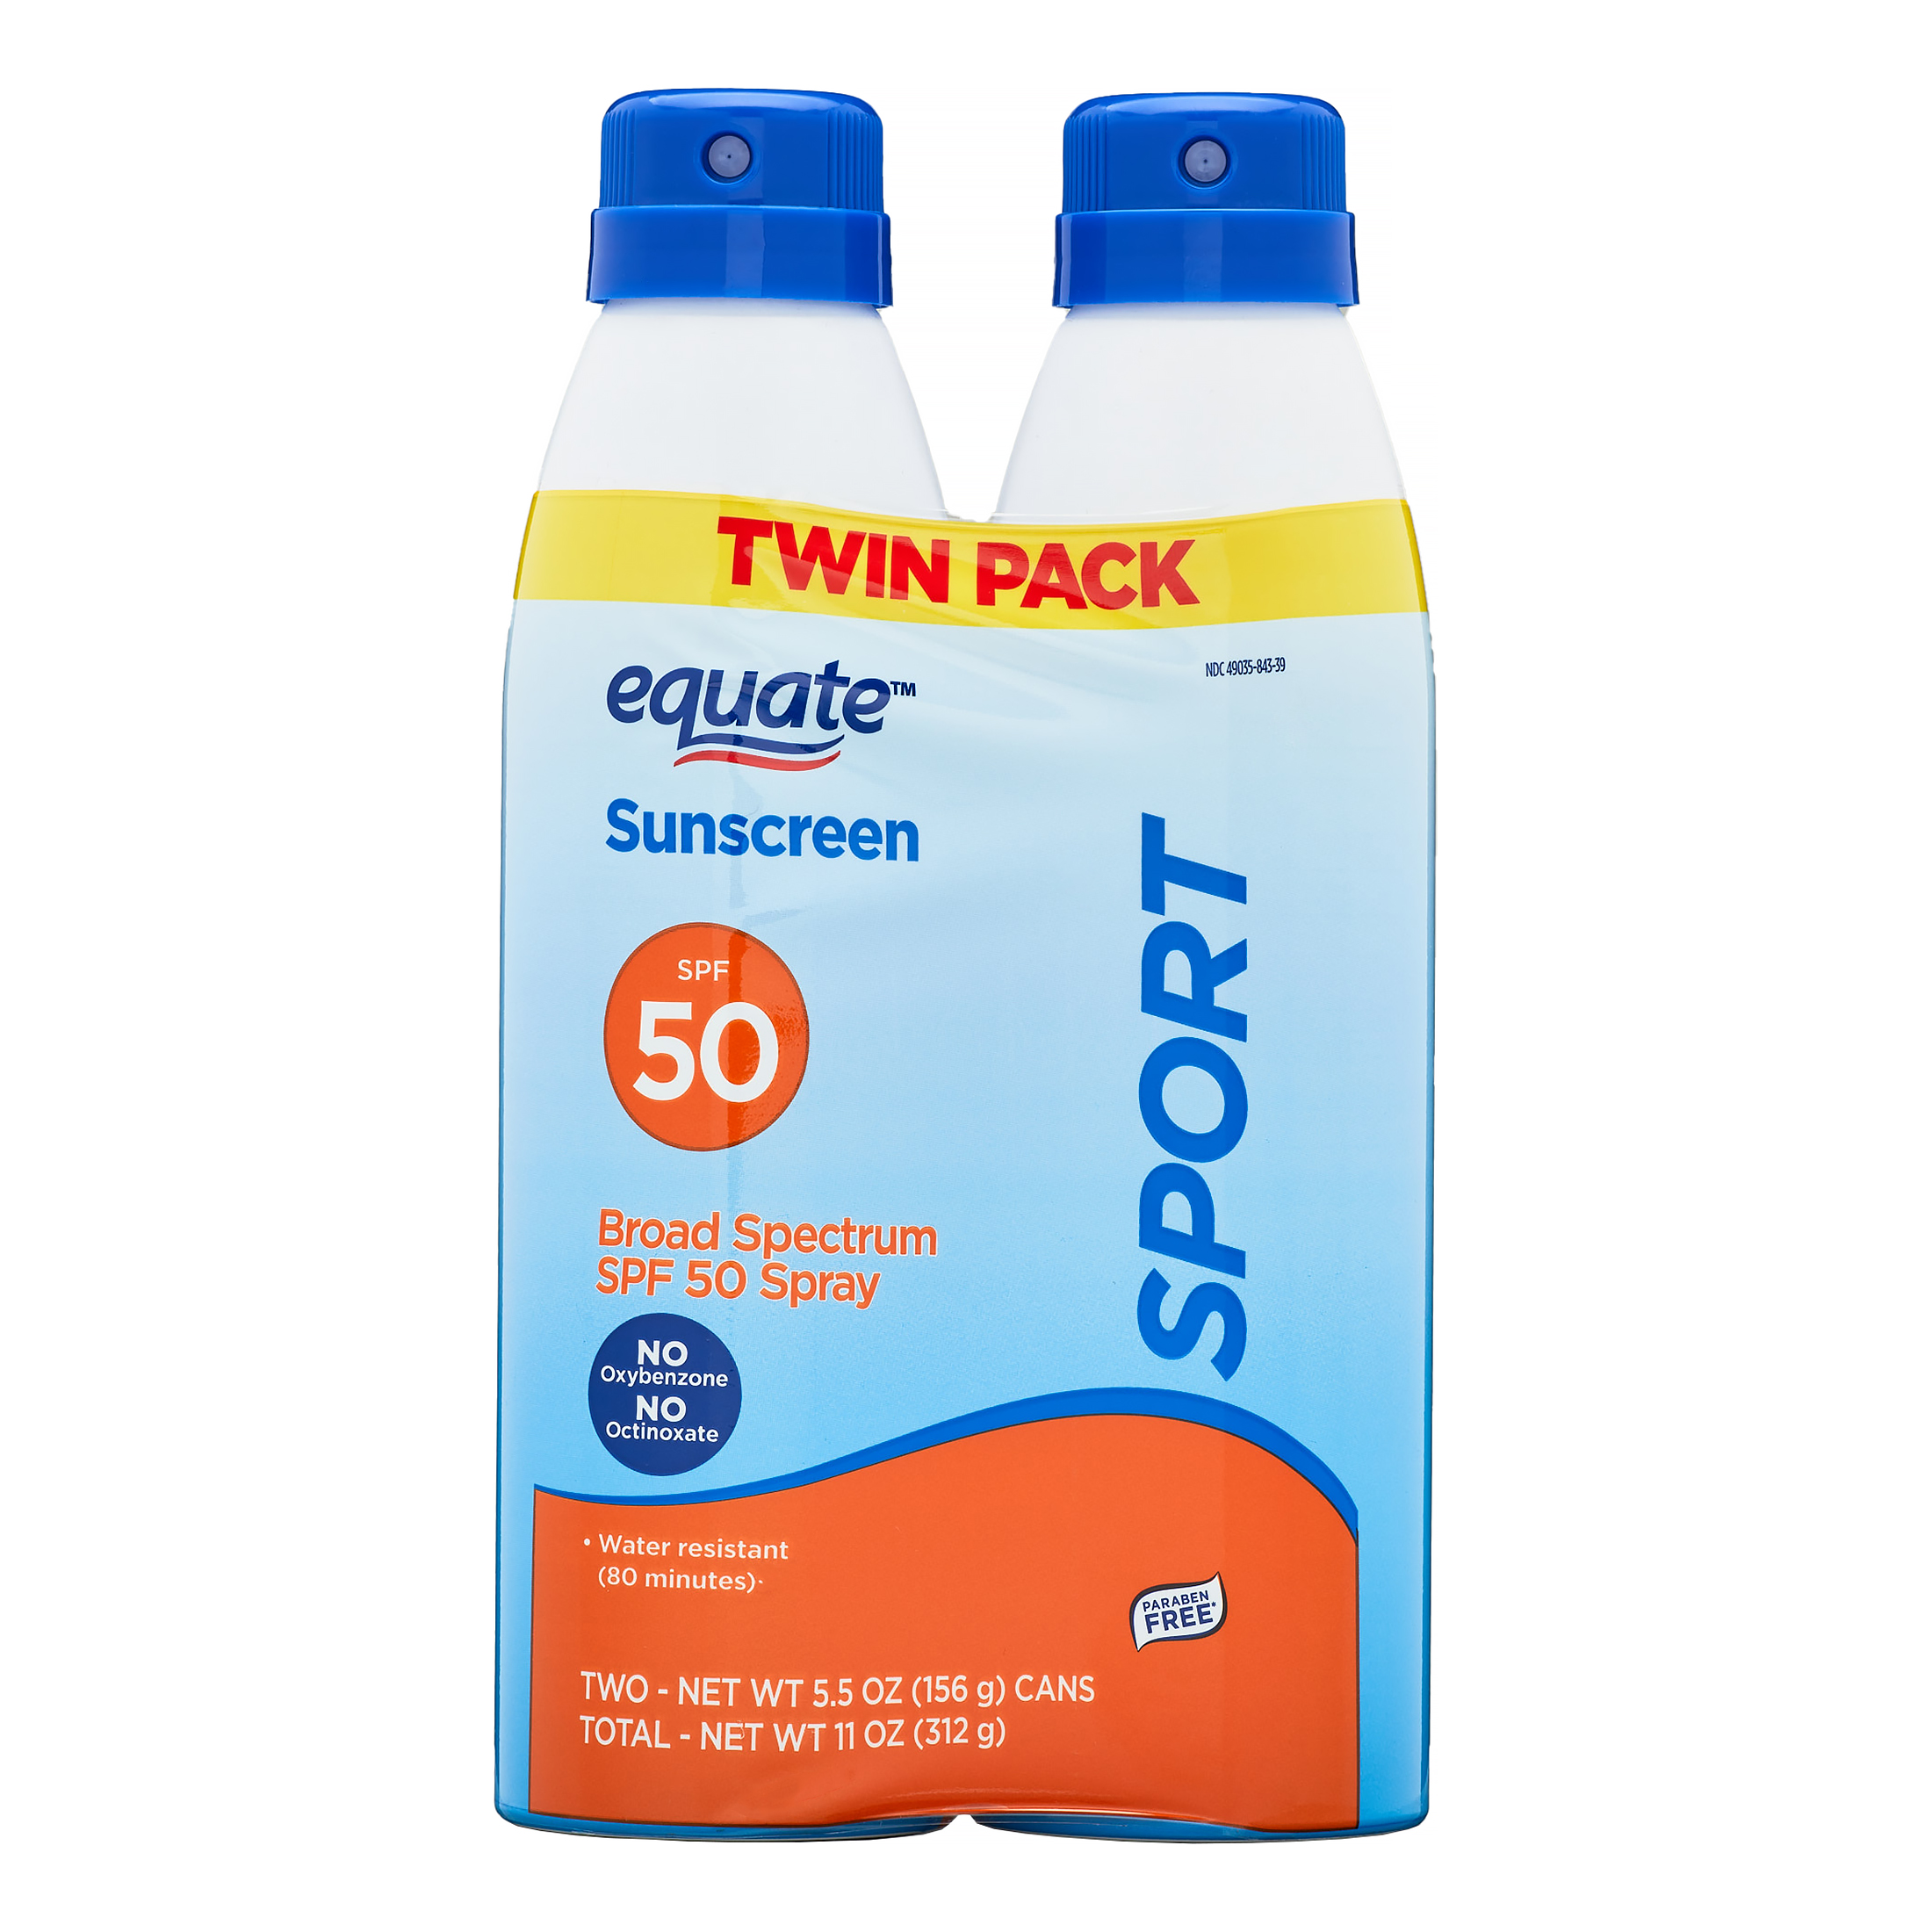 Equate Sport Broad Spectrum Sunscreen Spray, SPF 50, Twin Pack - image 1 of 8